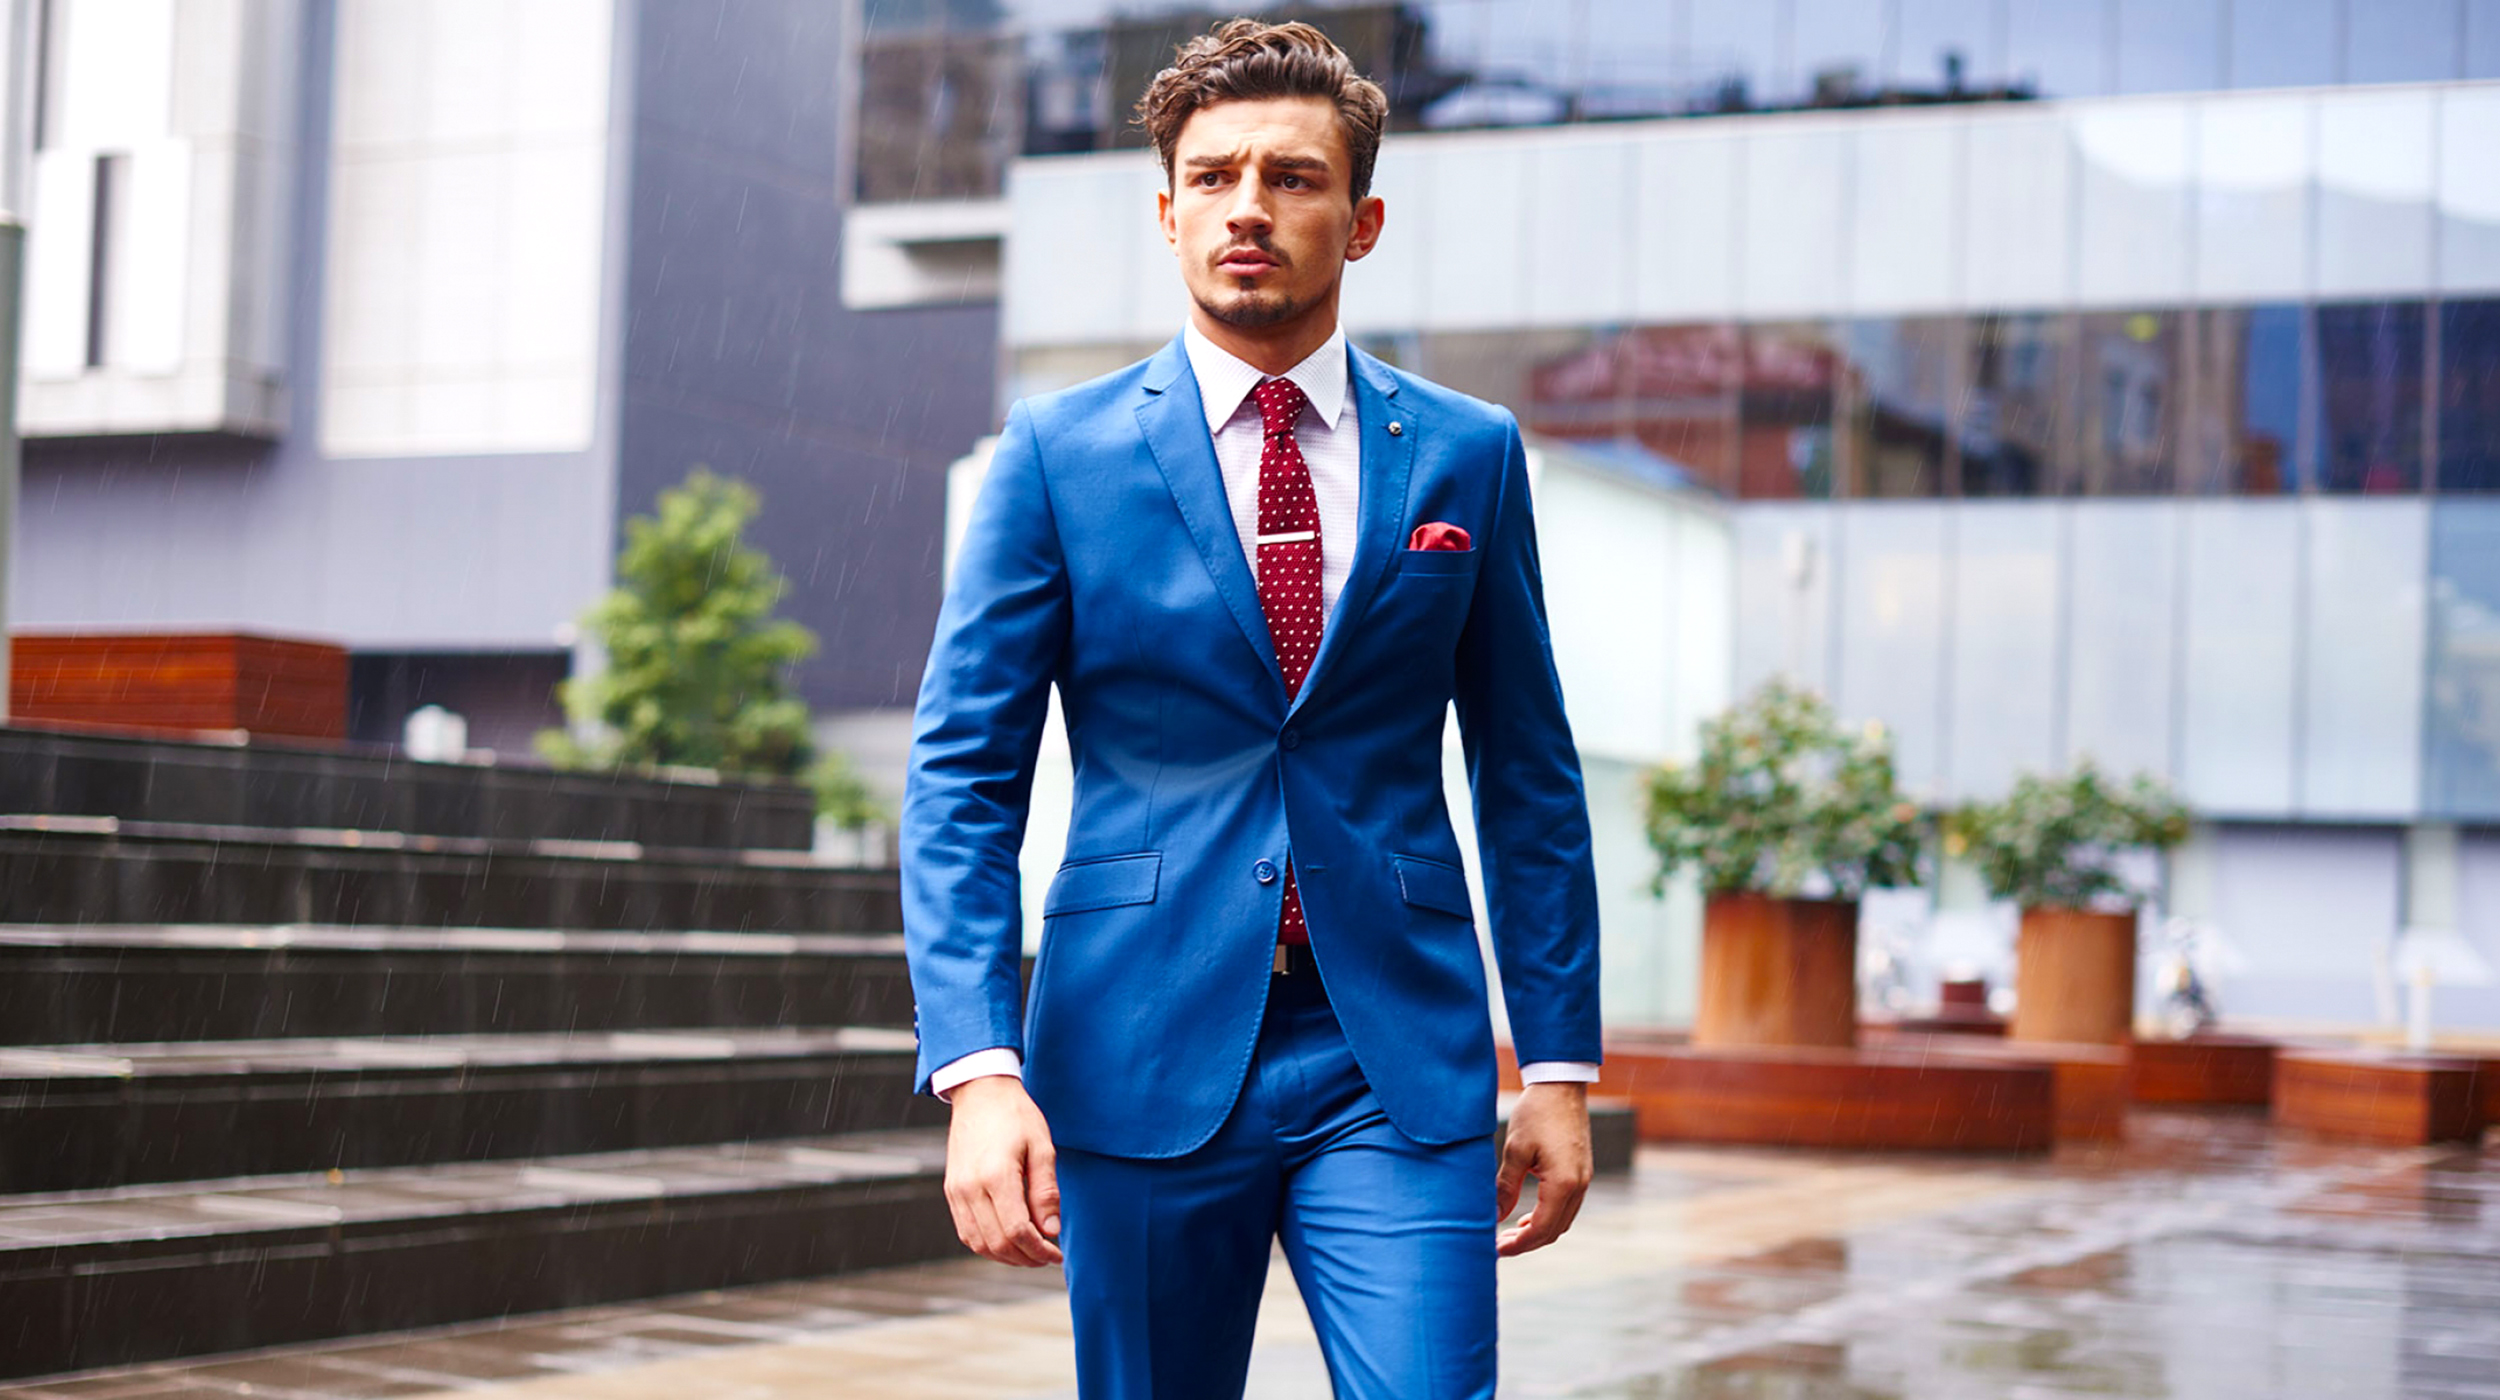 Blue suit matched with a white shirt and a red tie